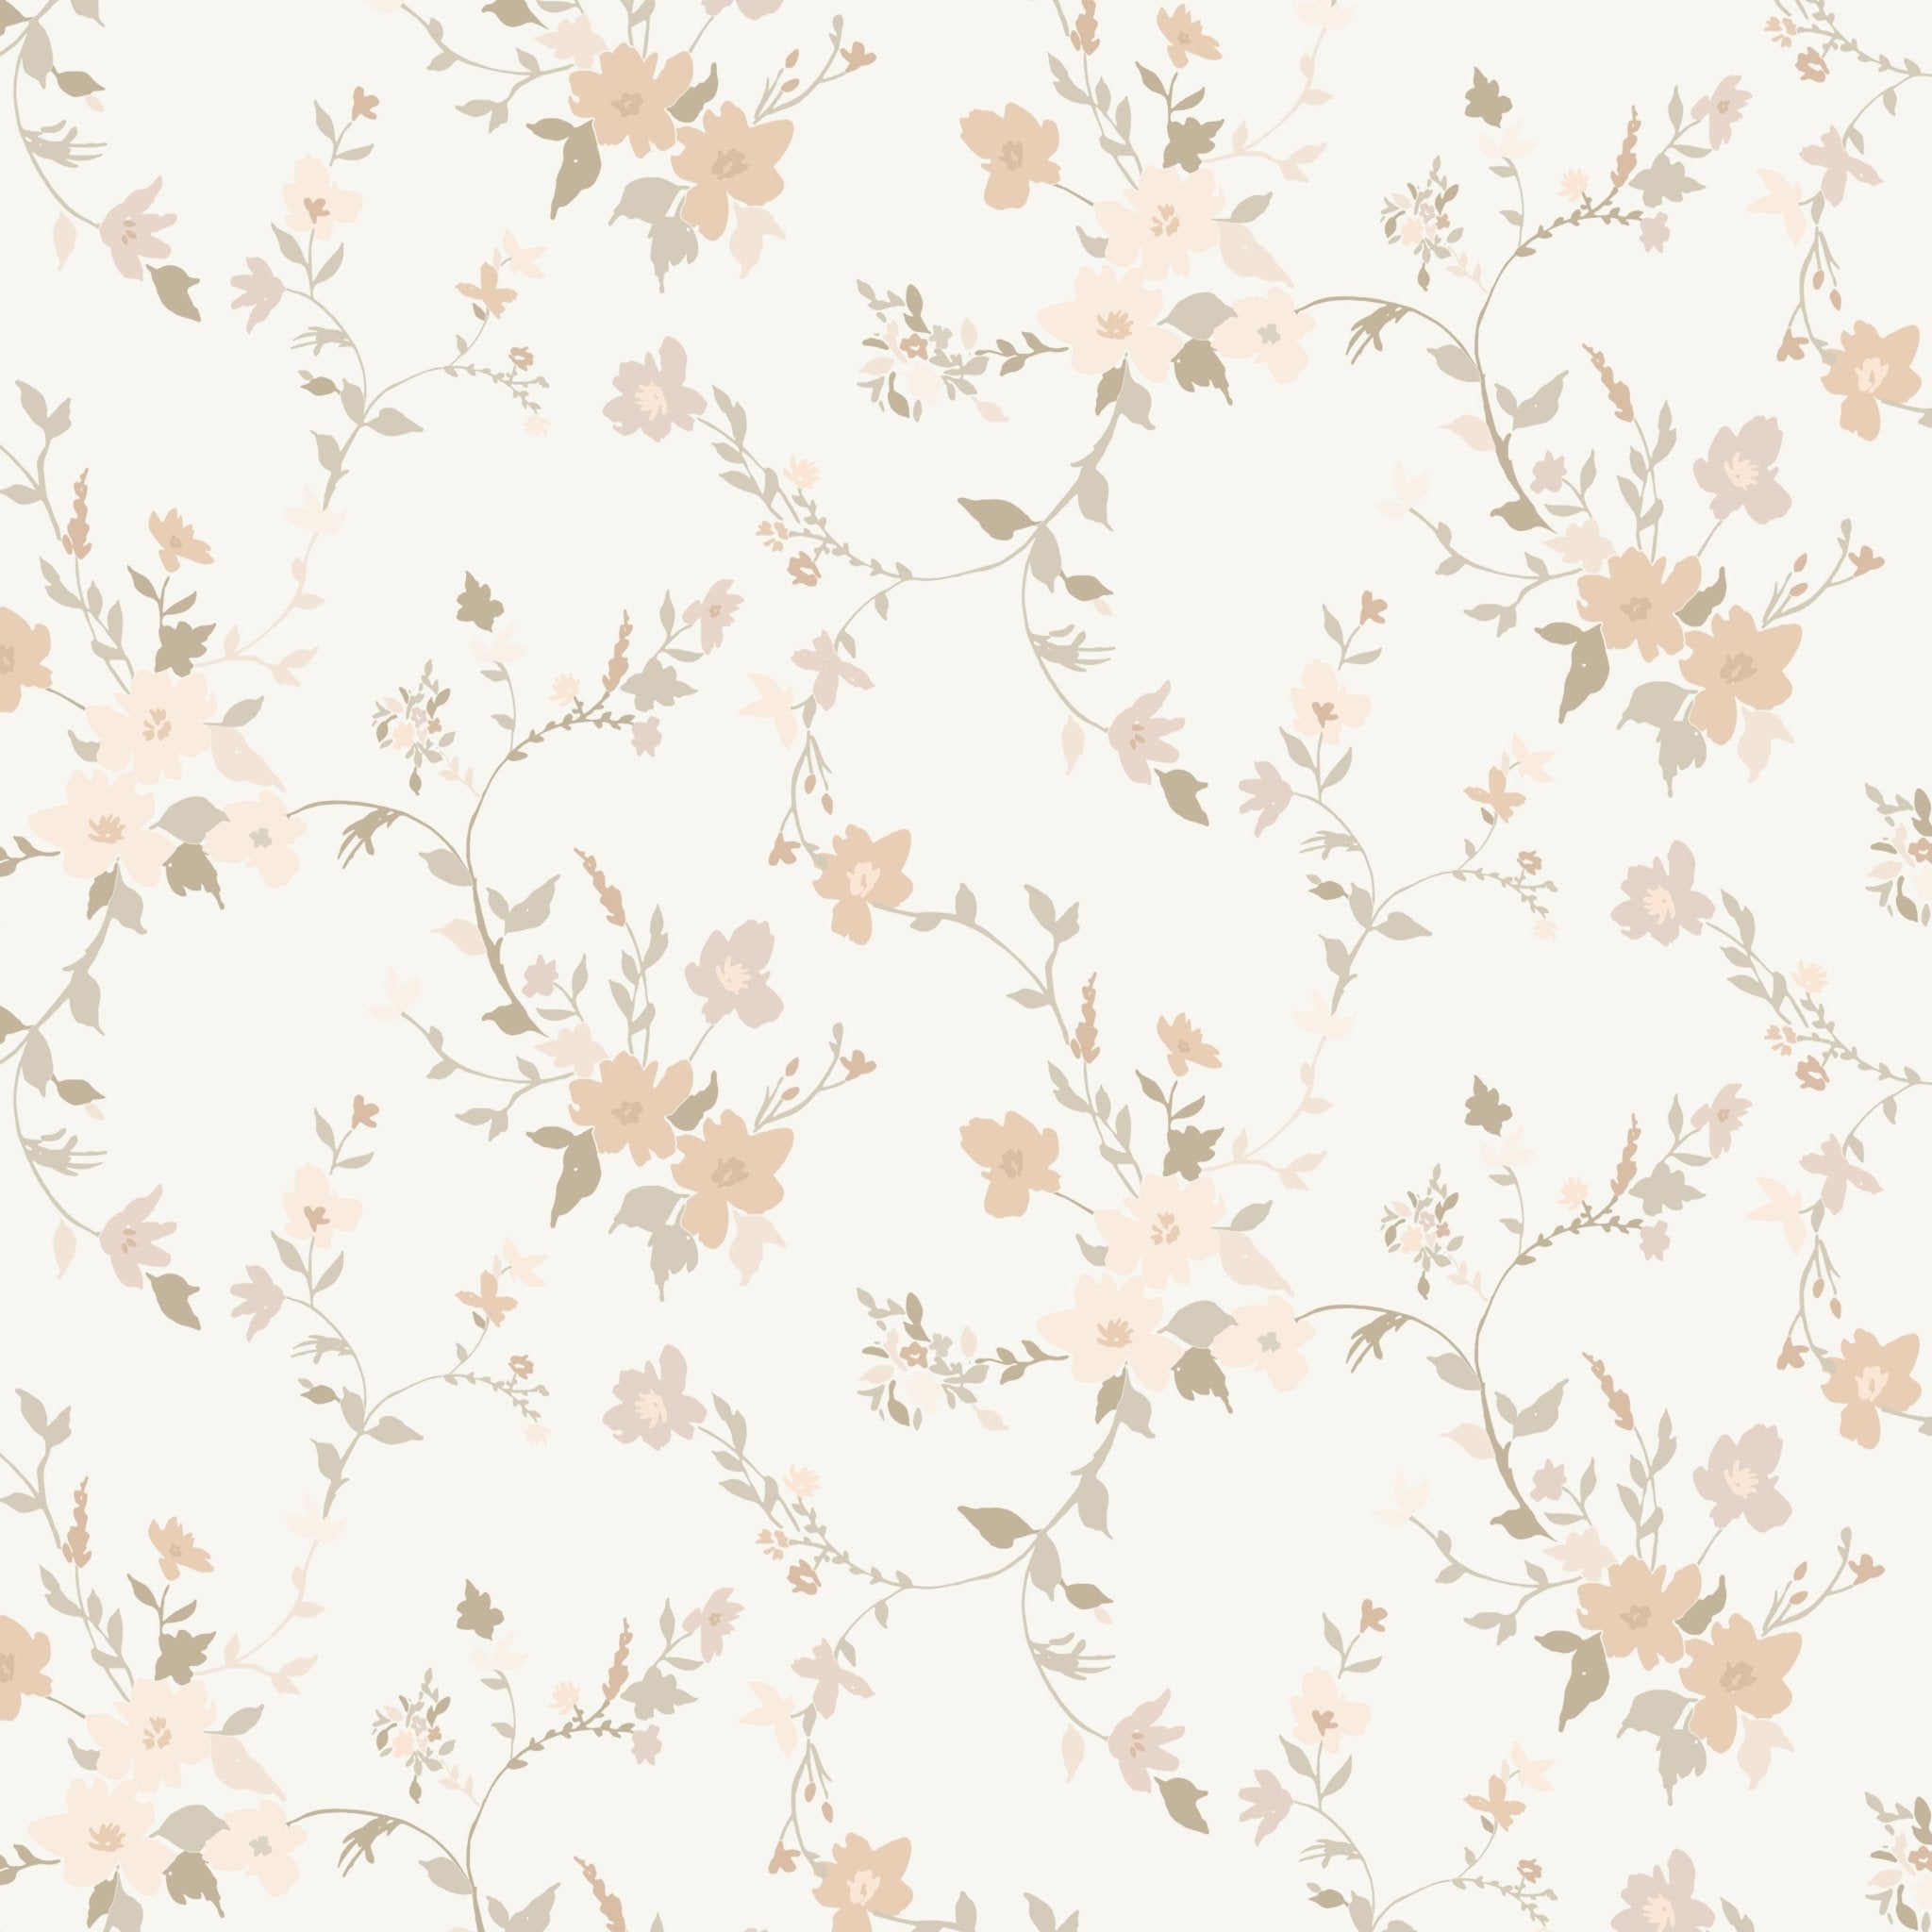 Soft pastel floral pattern with blush, taupe, and white flowers mingling with light green foliage on a creamy background, creating a whimsical and gentle ambiance for wall decor